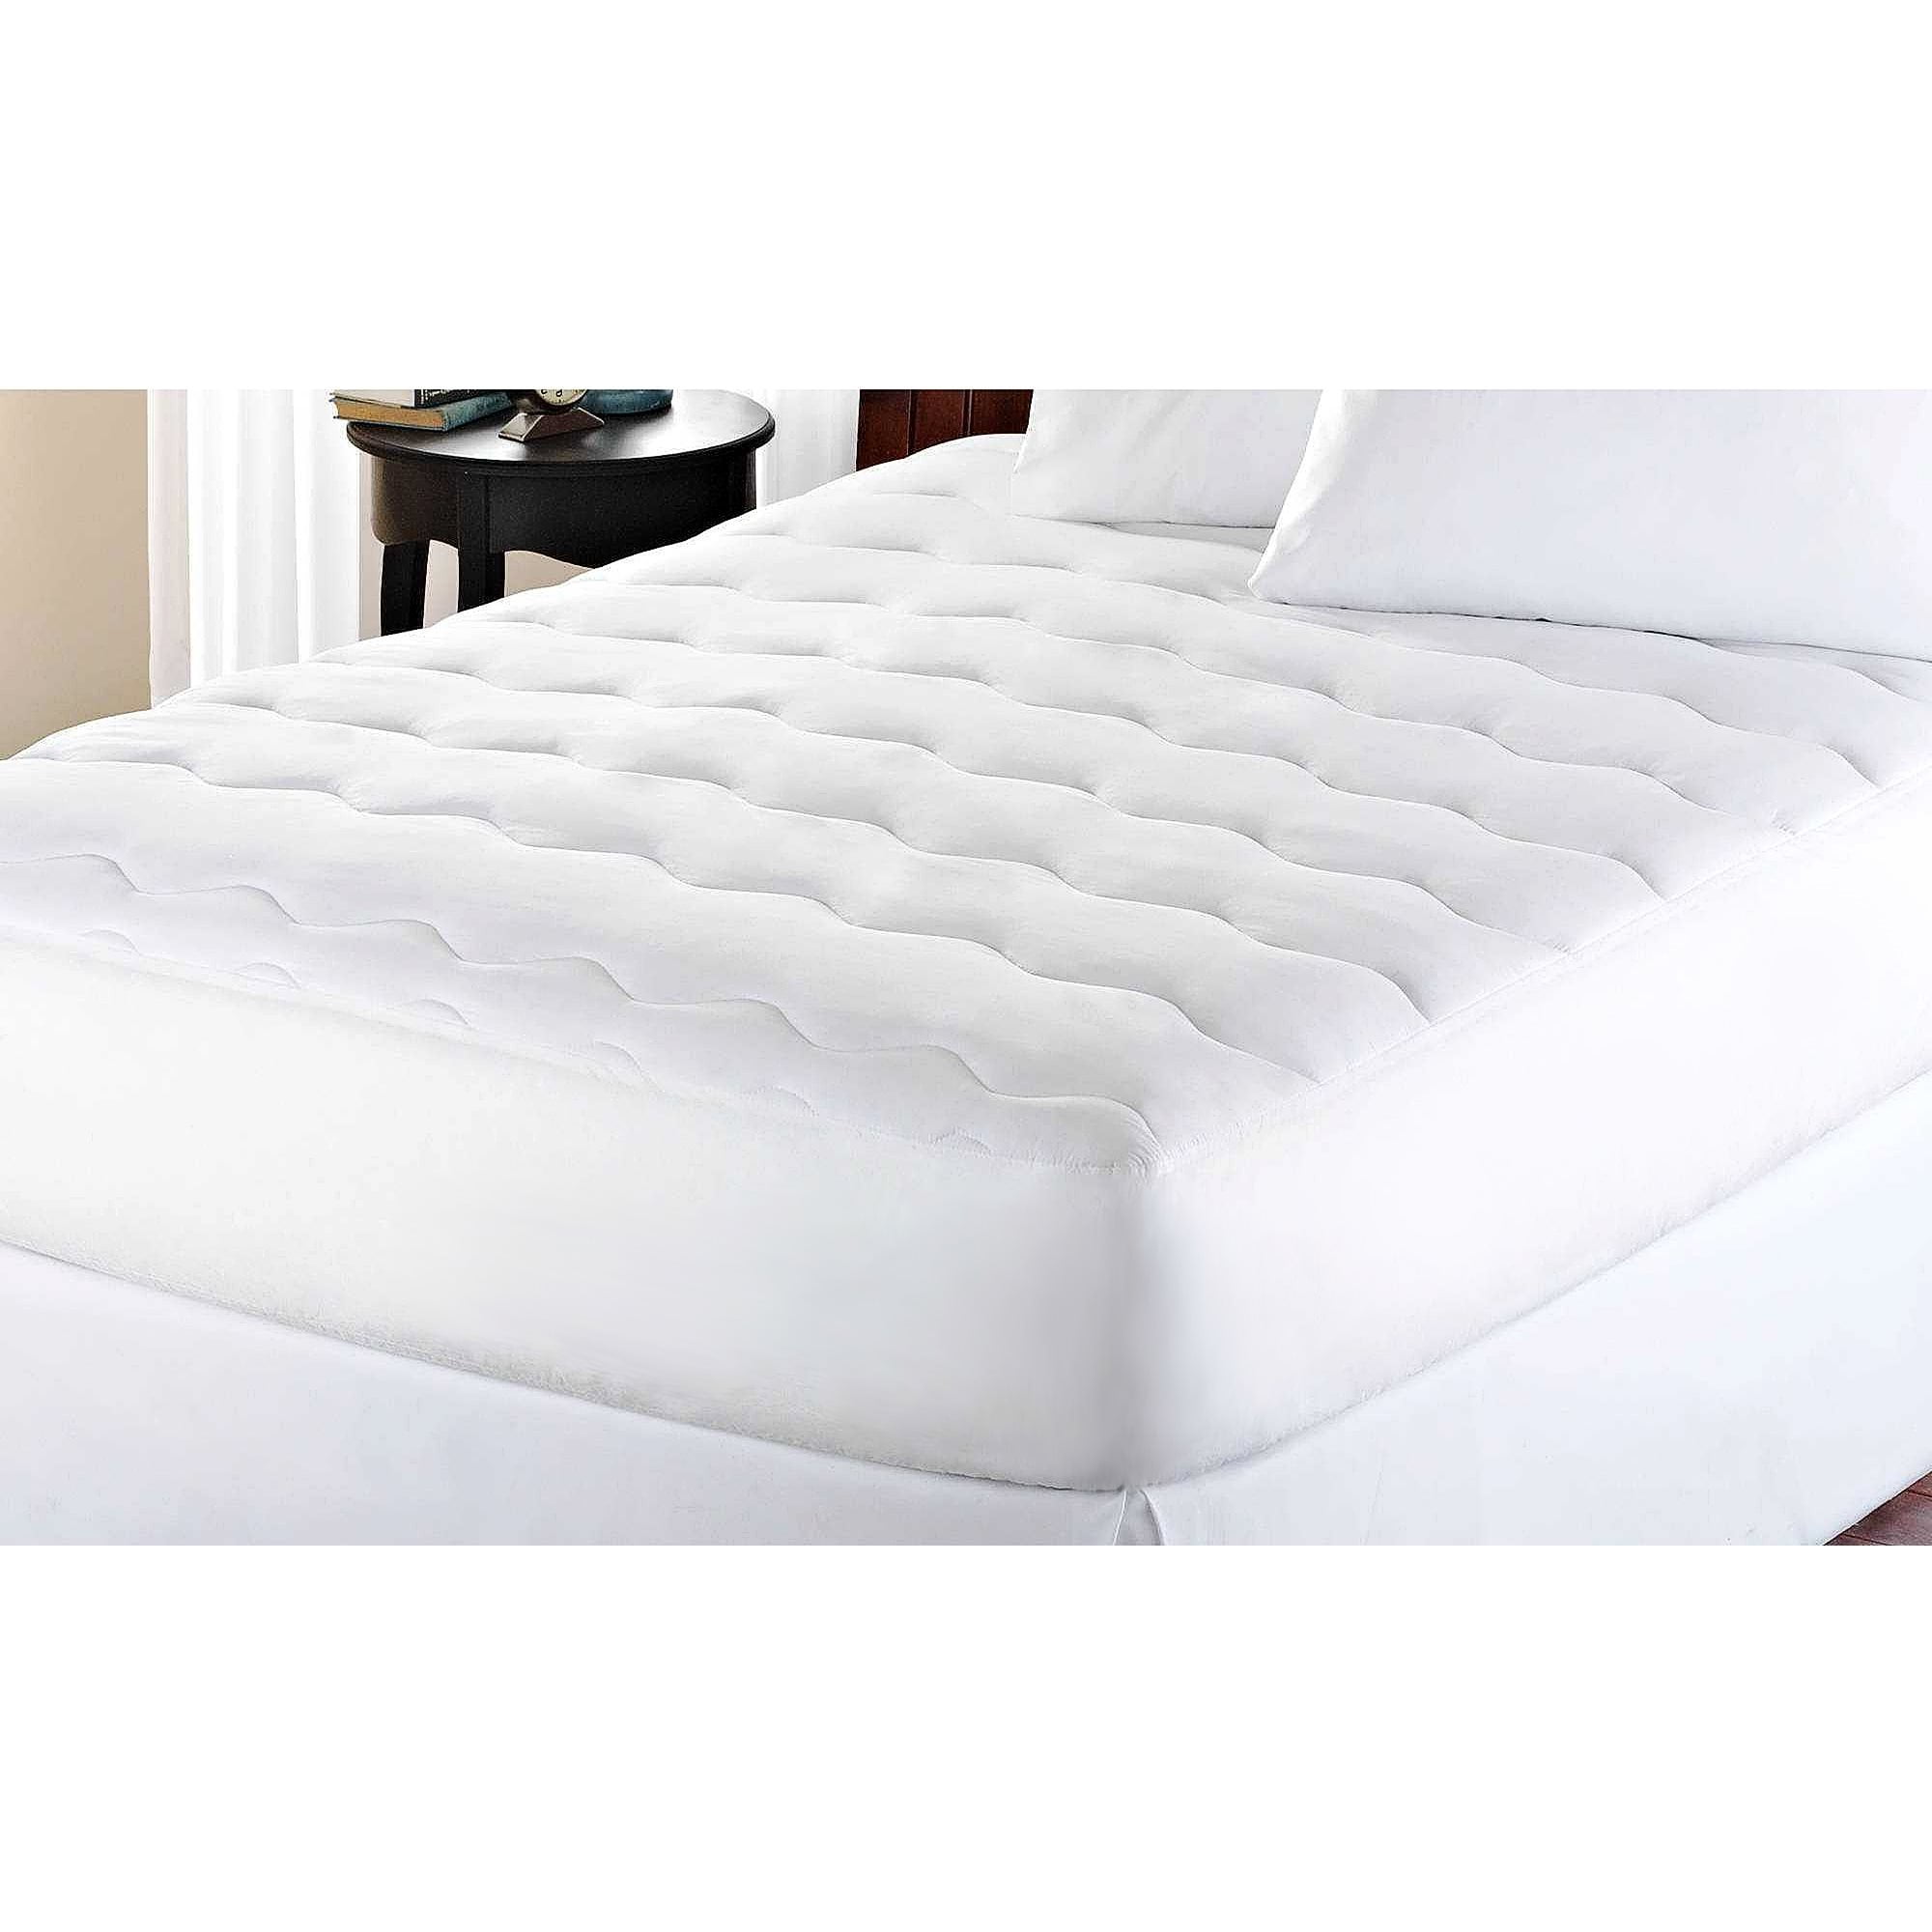 Box of 10 Twin Size Cotton Quilted Mattress Pad with Polyester Batting 36" x 75" 